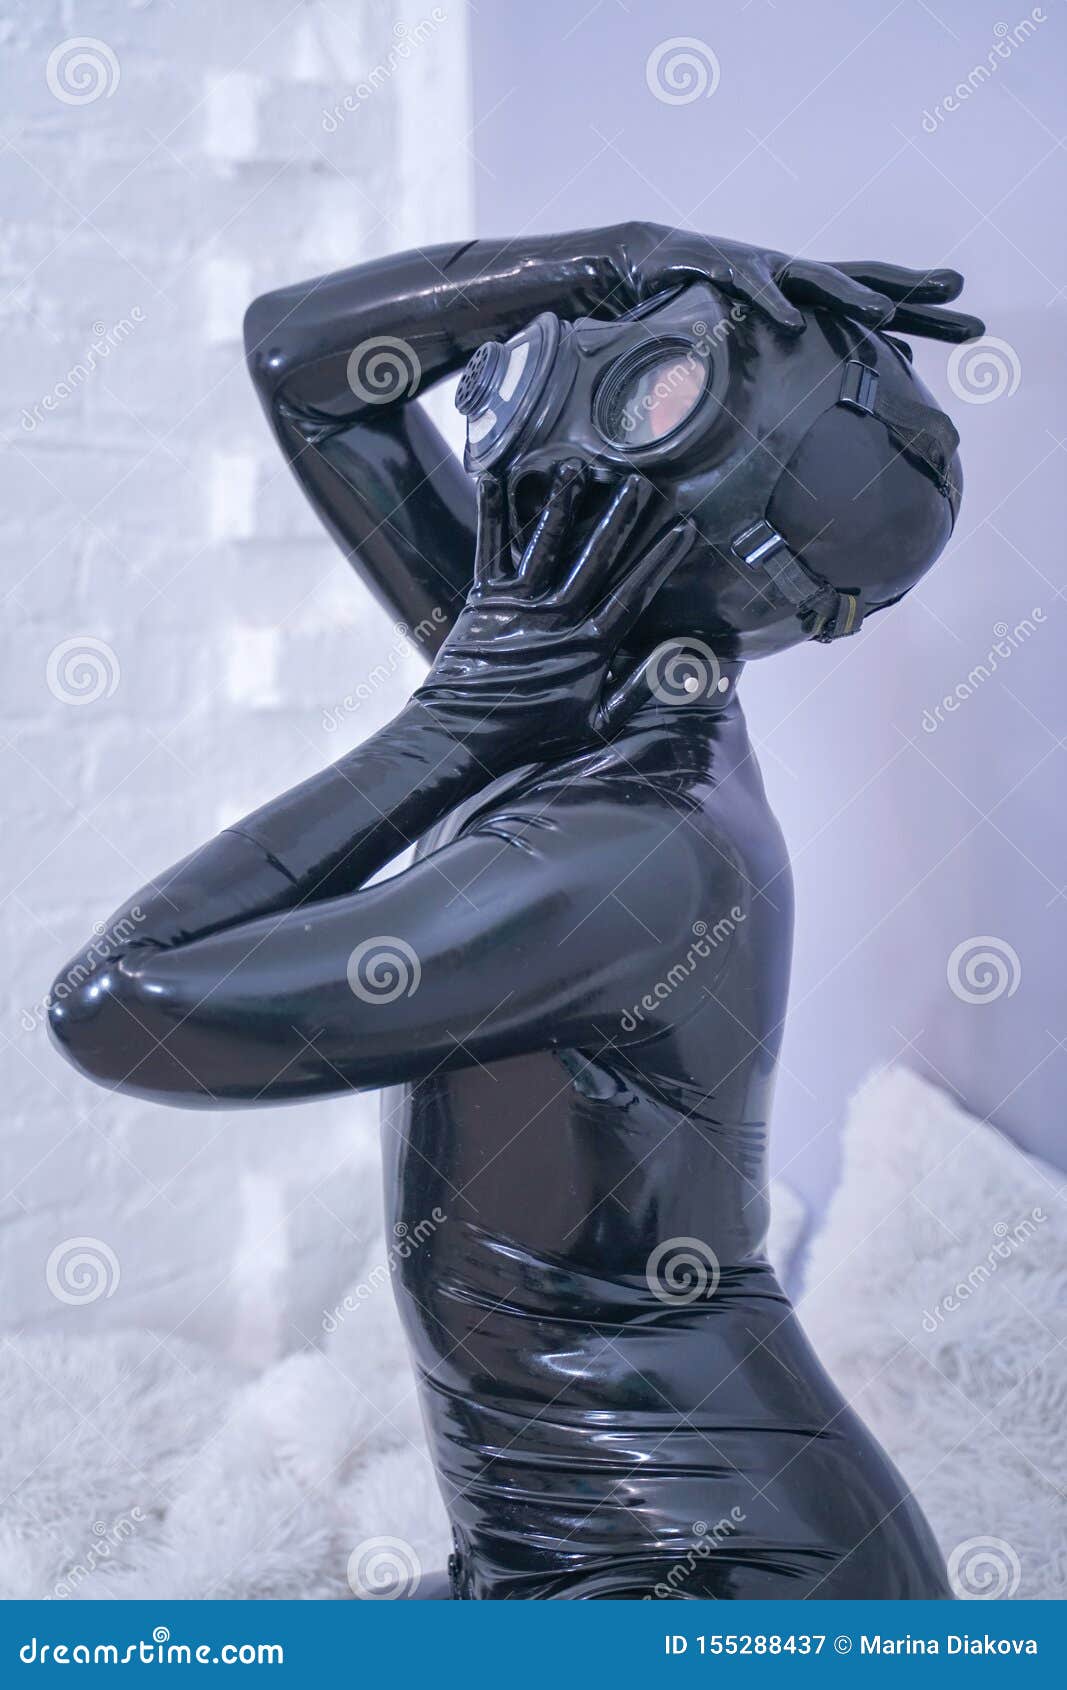 Besparing Verhoogd einde Man in the Latex Rubber Black Catsuit with Gasmask Stock Image - Image of  muscle, mask: 155288437